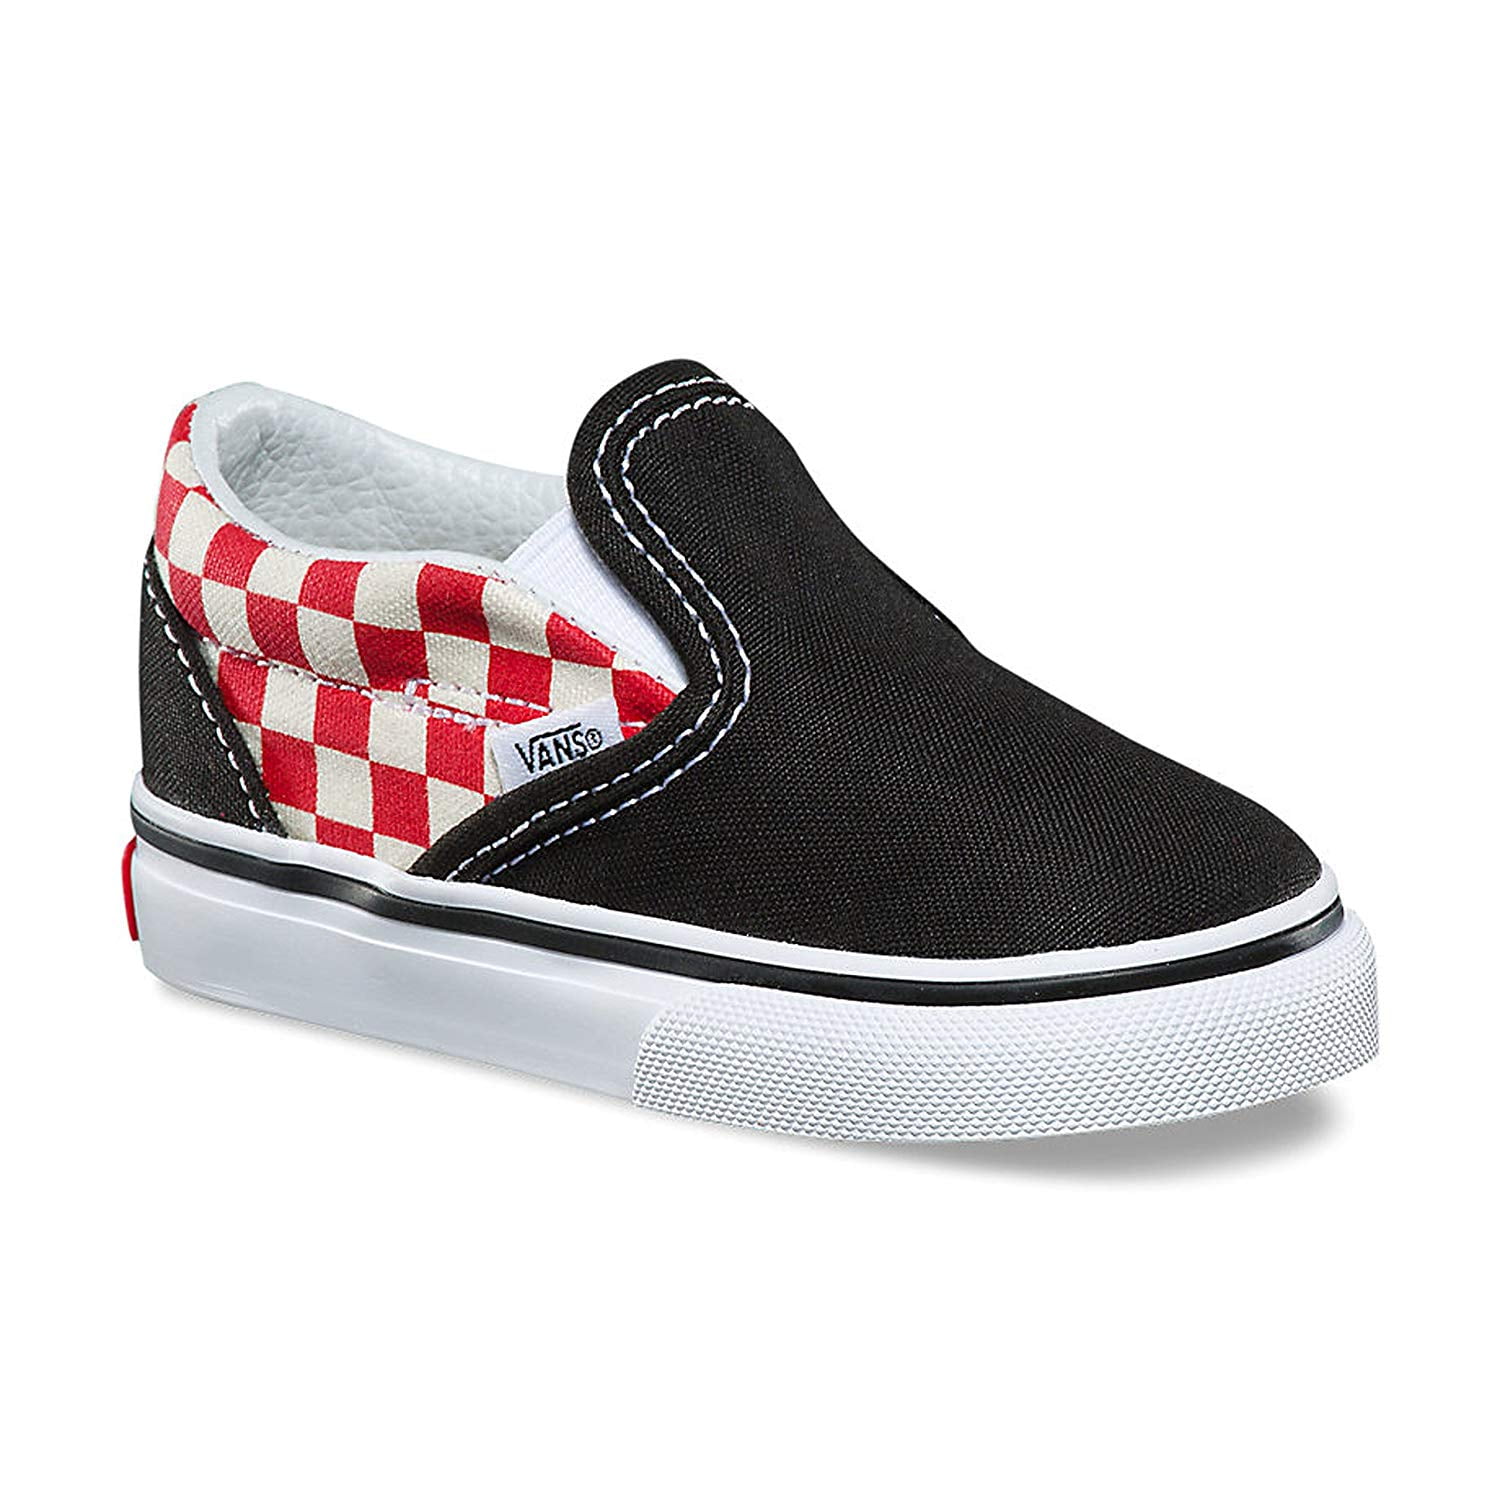 black and red checkered vans slip ons